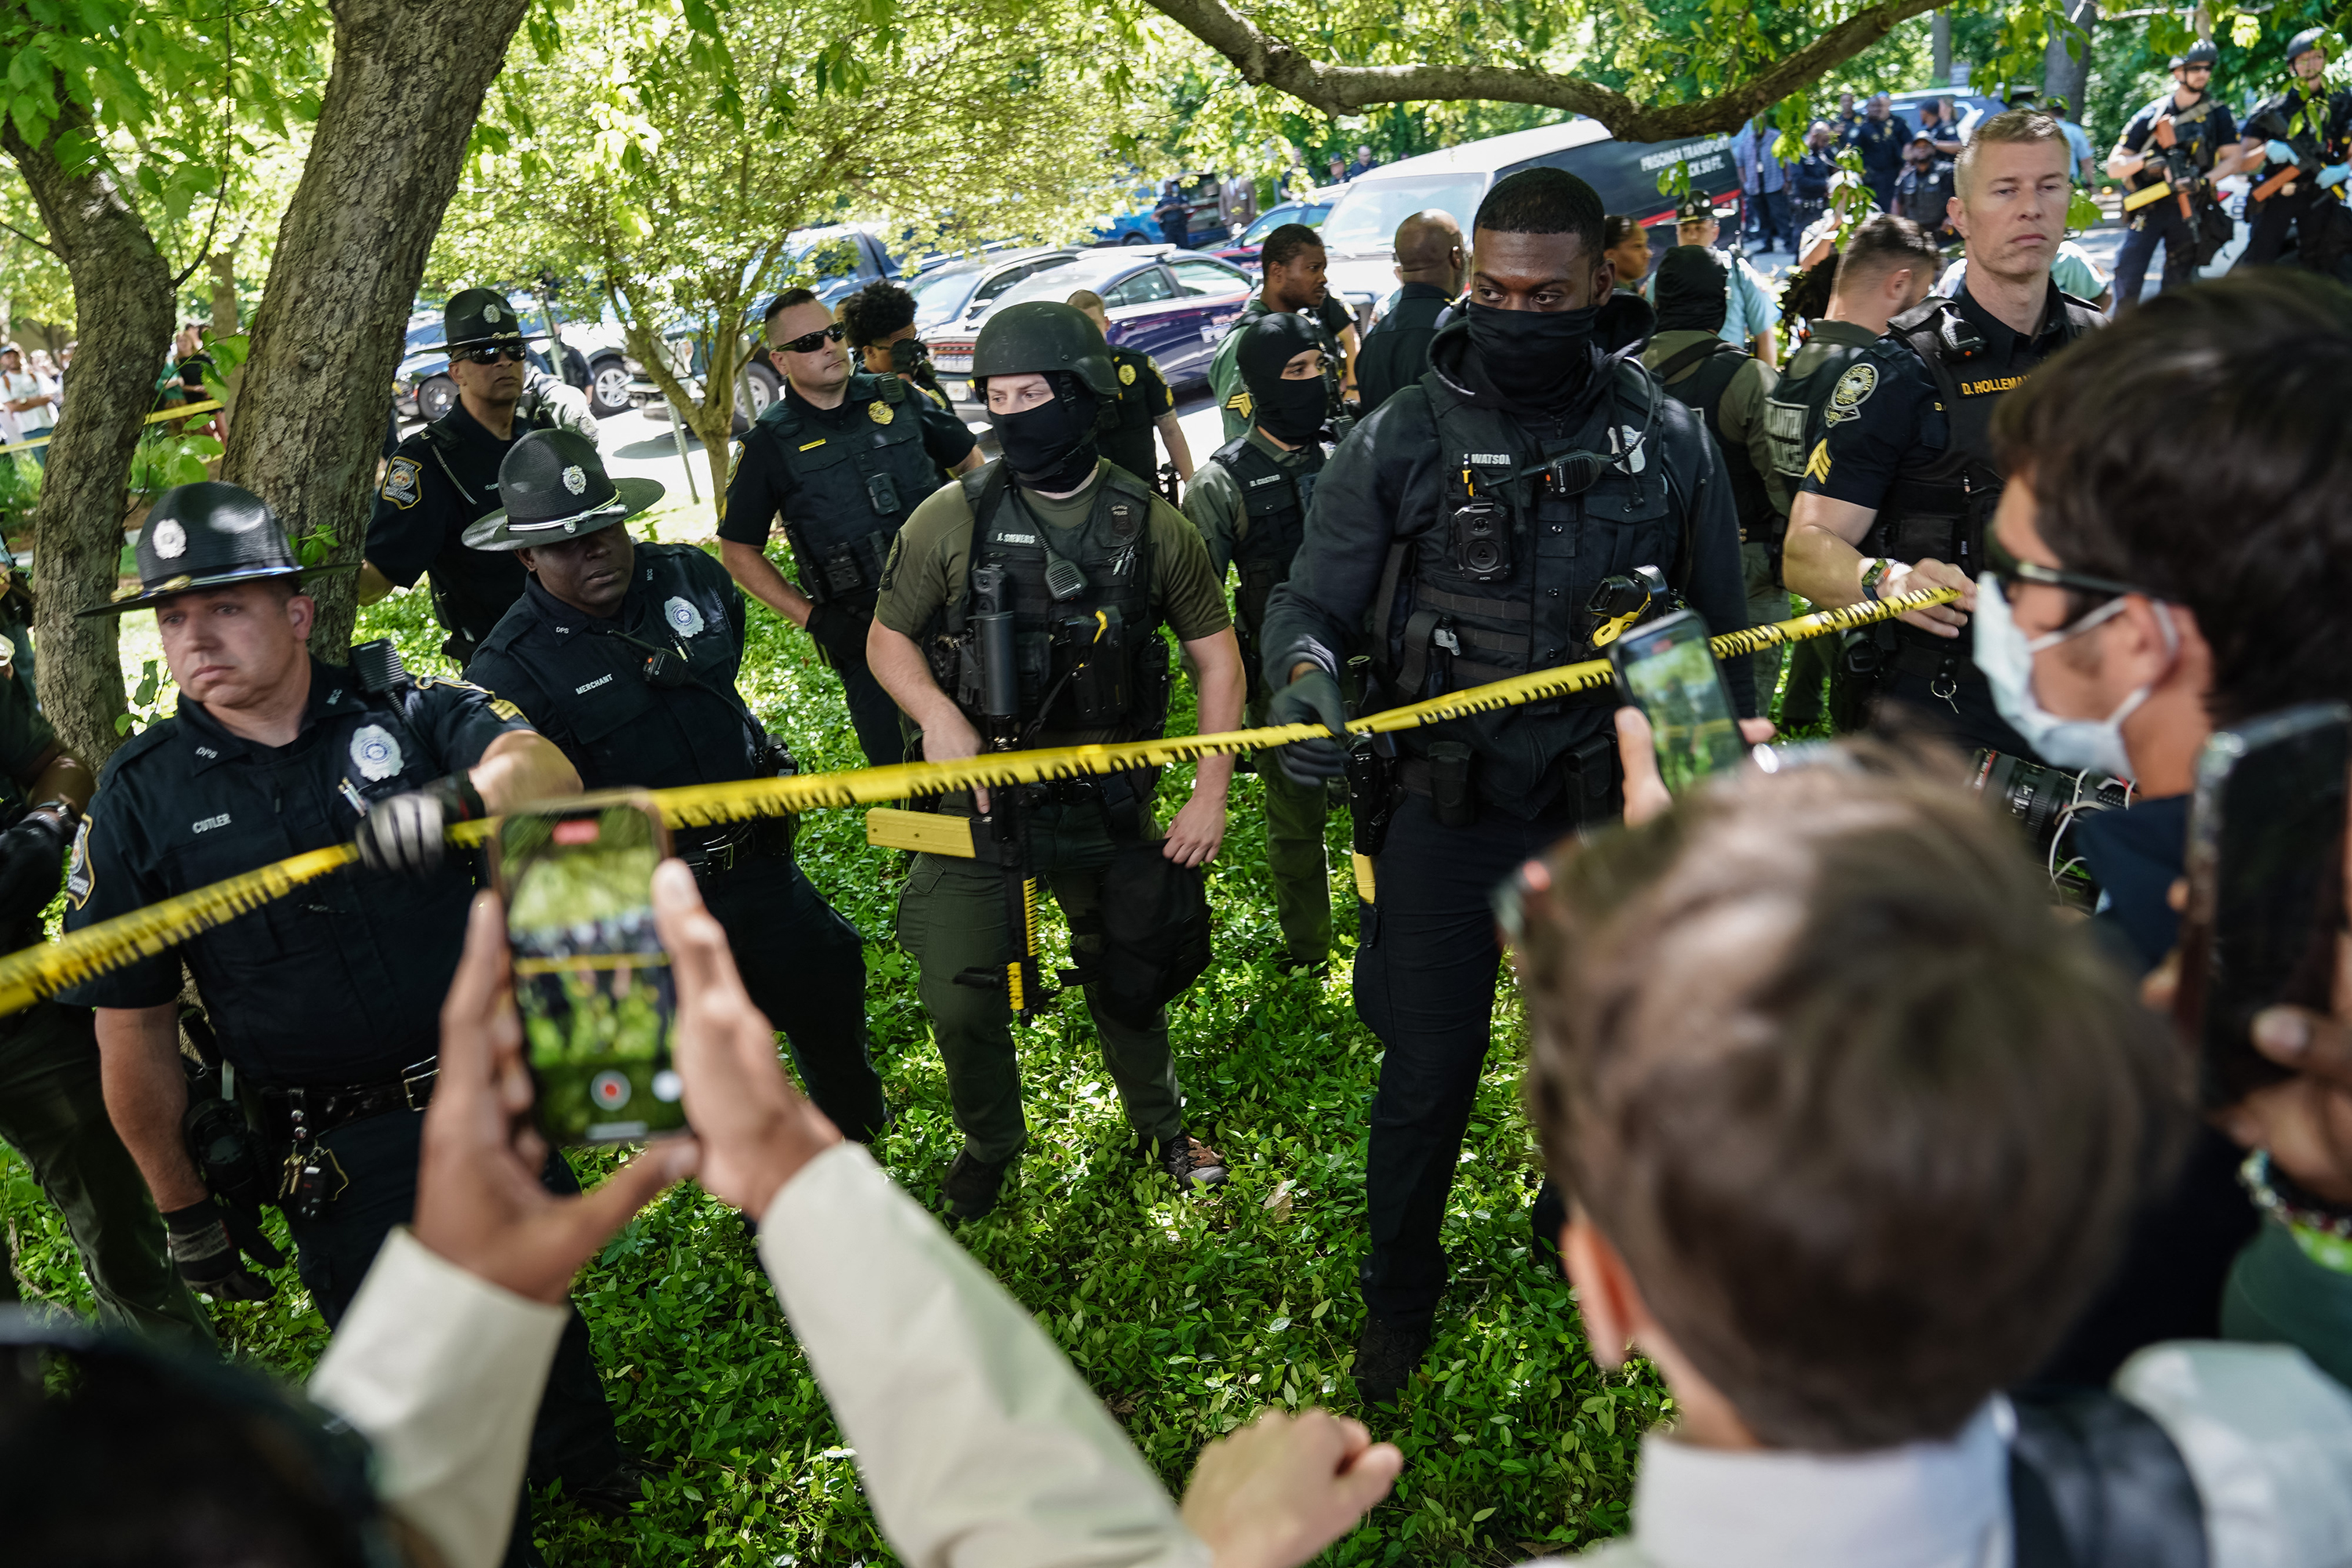 Pro-Palestinian activists confront police officers during a demonstration at Emory University on April 25, in Atlanta, Georgia.